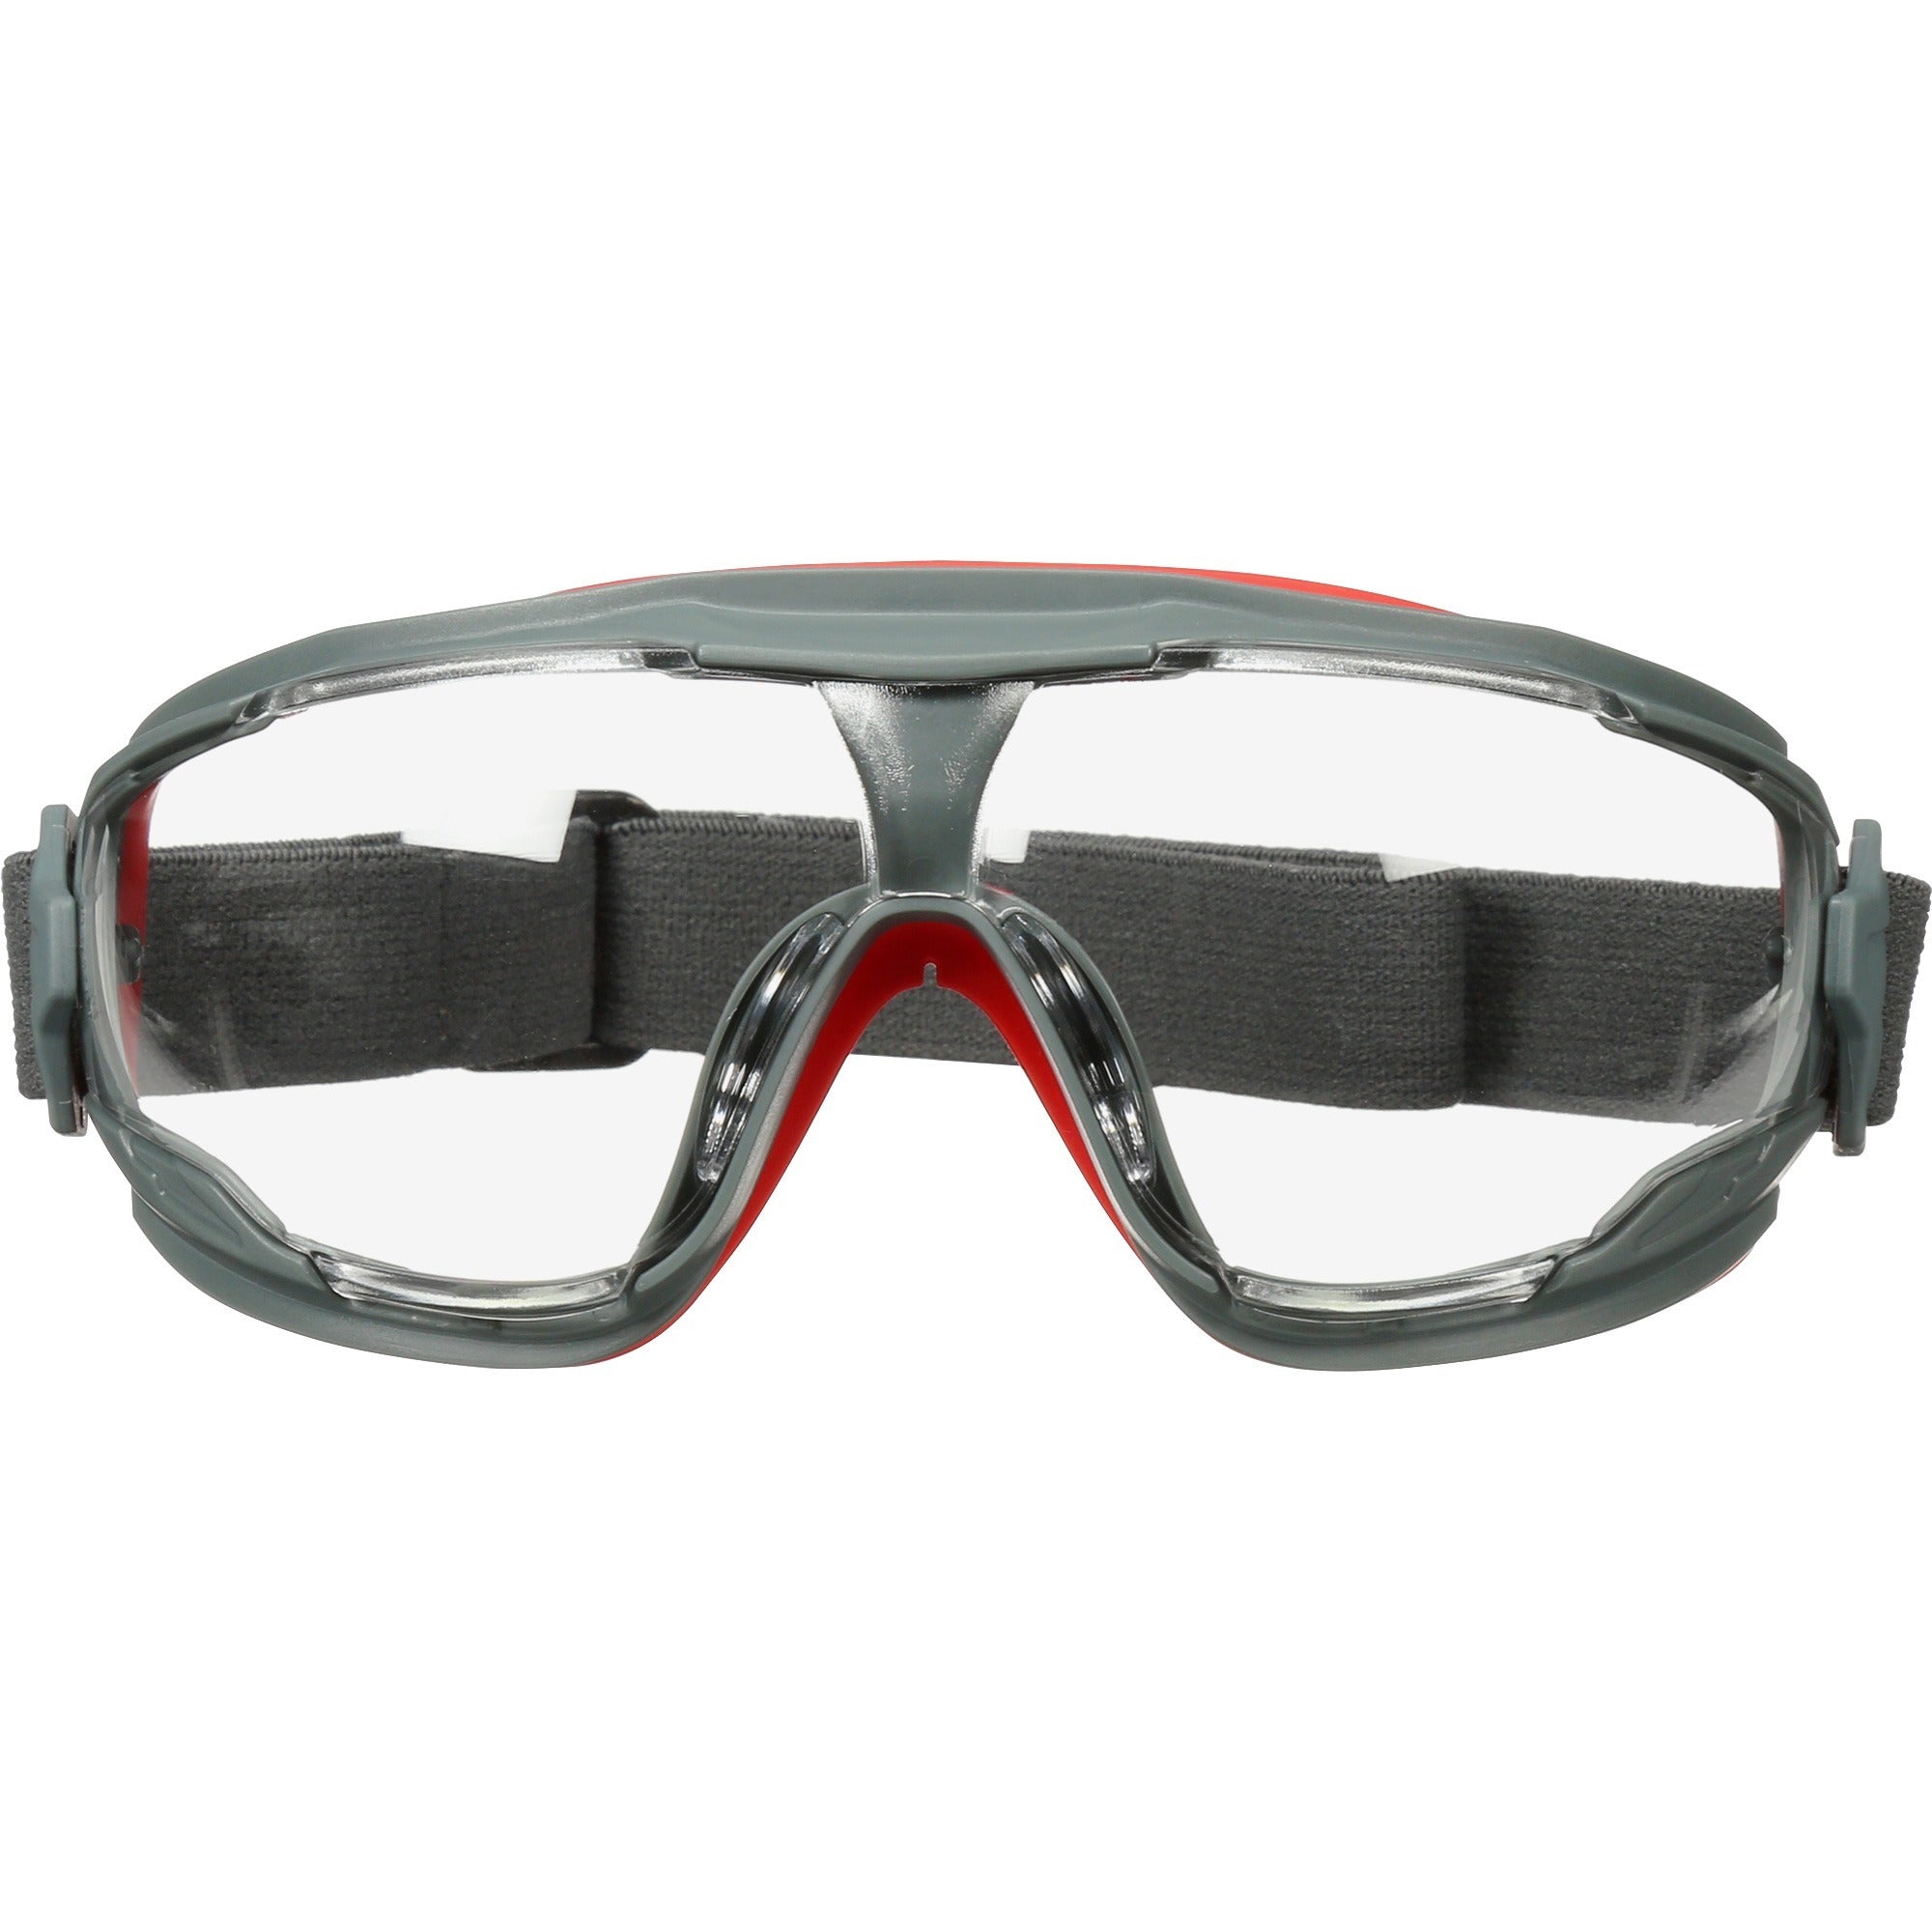 3m-gogglegear-500-series-scotchgard-anti-fog-goggles-recommended-for-eye-splash-ultraviolet-ultraviolet-protection-clear-lens-gray-frame-1-each_mmmgg501sgaf - 2